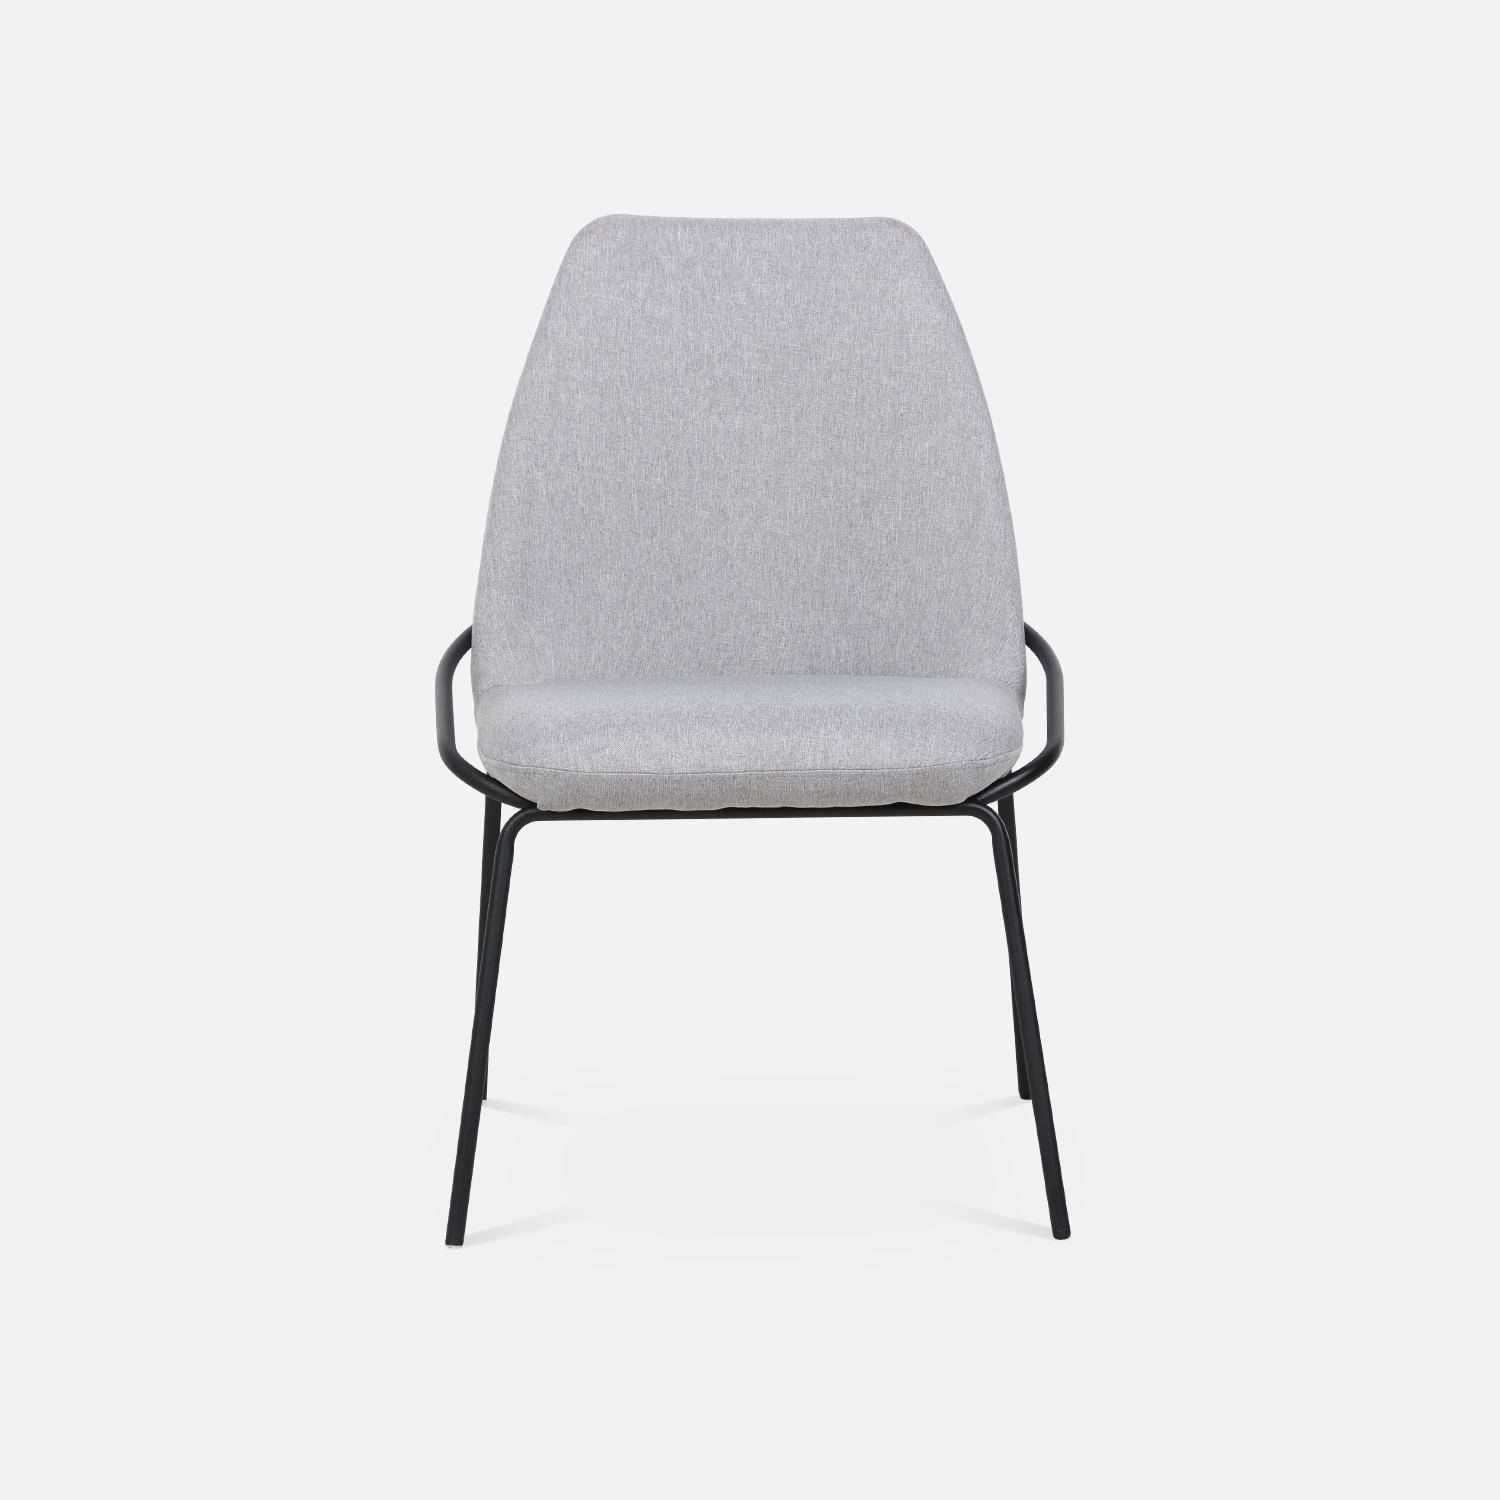 Retro-style metal and upholstered chair, 56.5x63x82.5cm, Lisbet, Light Grey,sweeek,Photo4